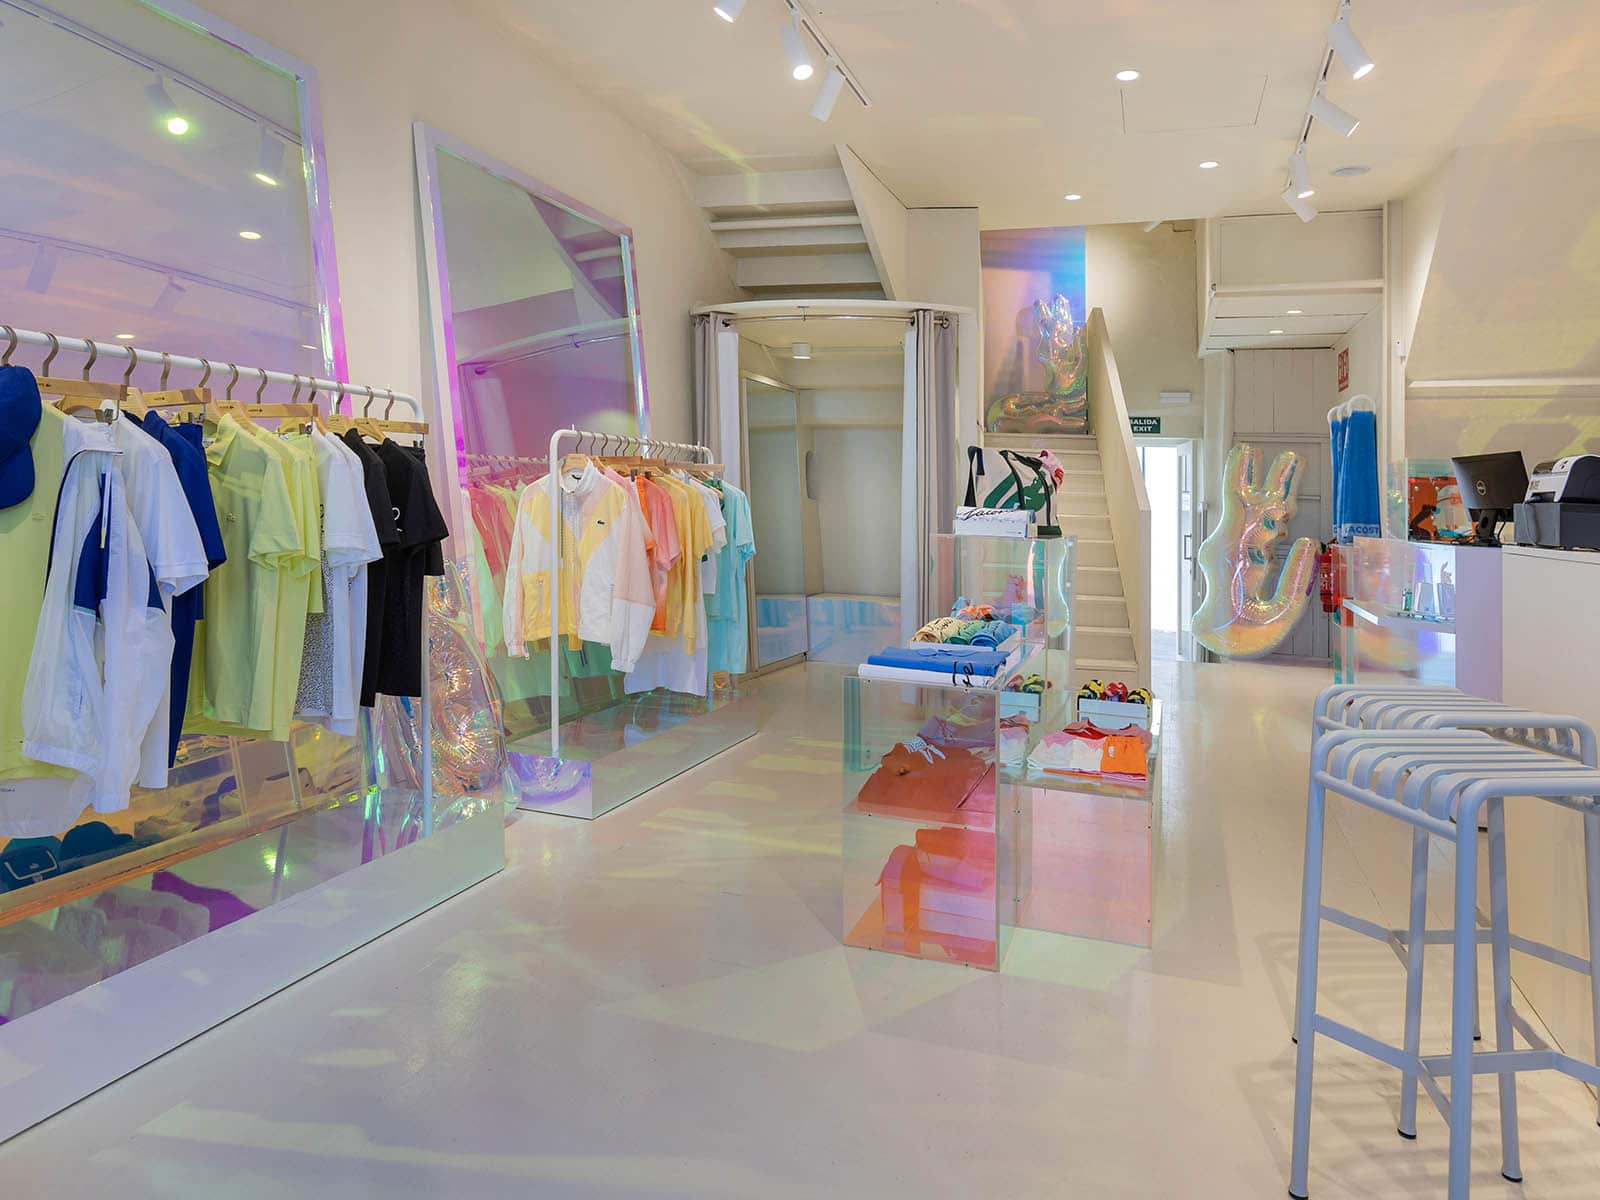 bjærgning Religiøs finansiel LACOSTE OPENS A UNIQUE NEW POP-UP IN IBIZA – PROMOSTYL